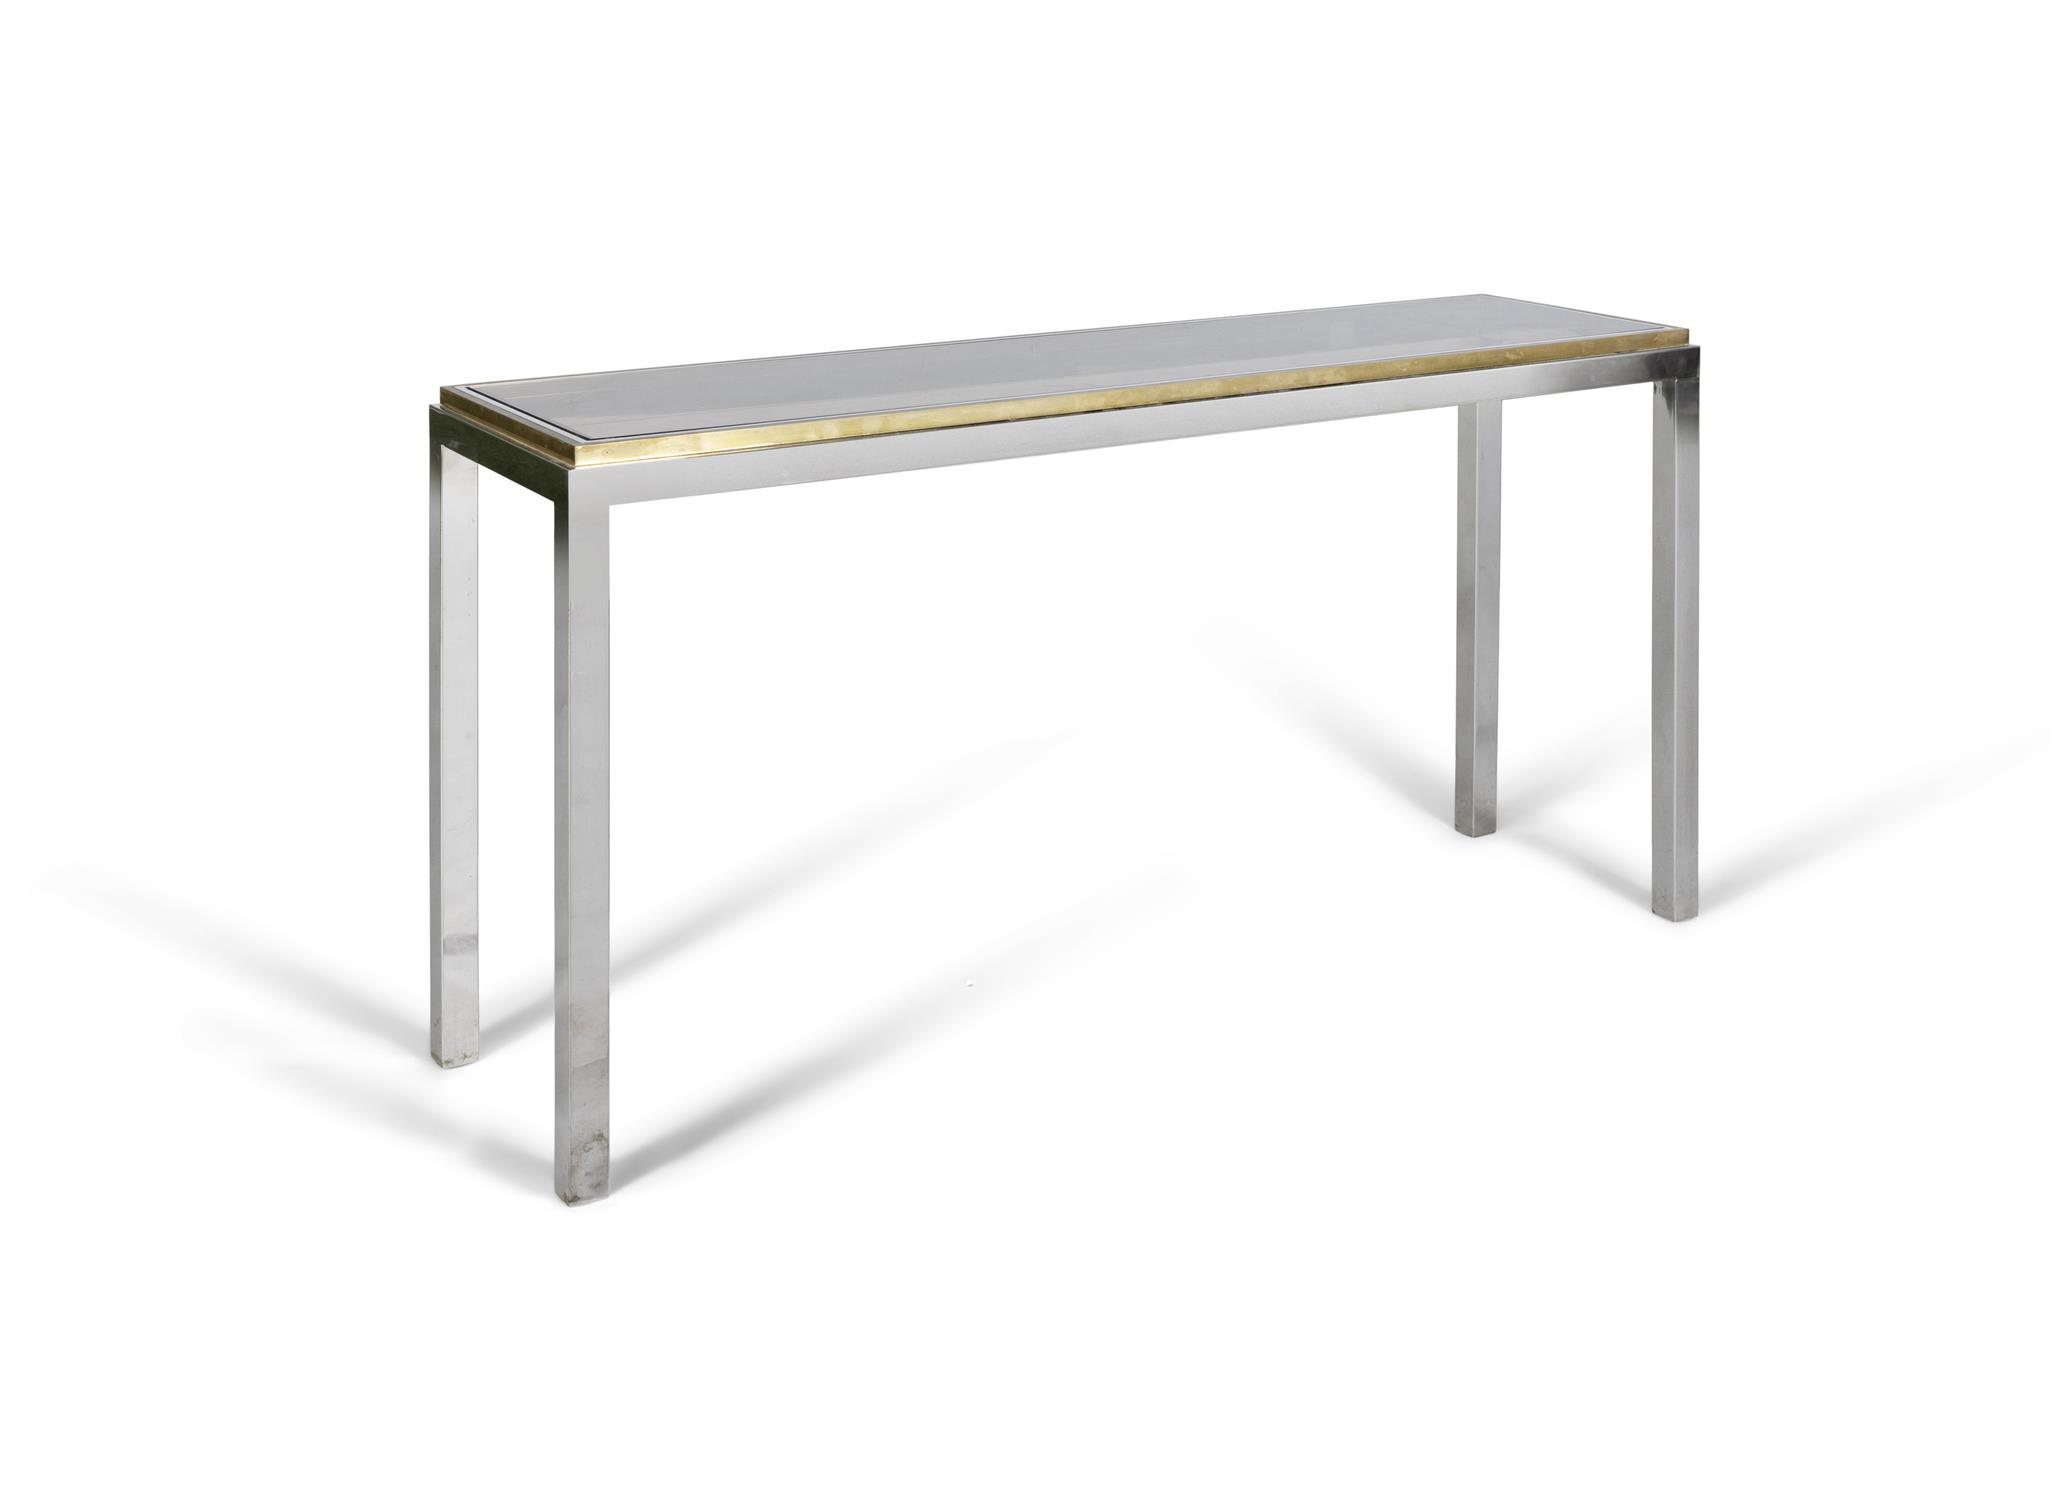 CONSOLE TABLE A gilt metal and chrome console table. Italy, c.1970. 140 x 40 x 75.5(h)